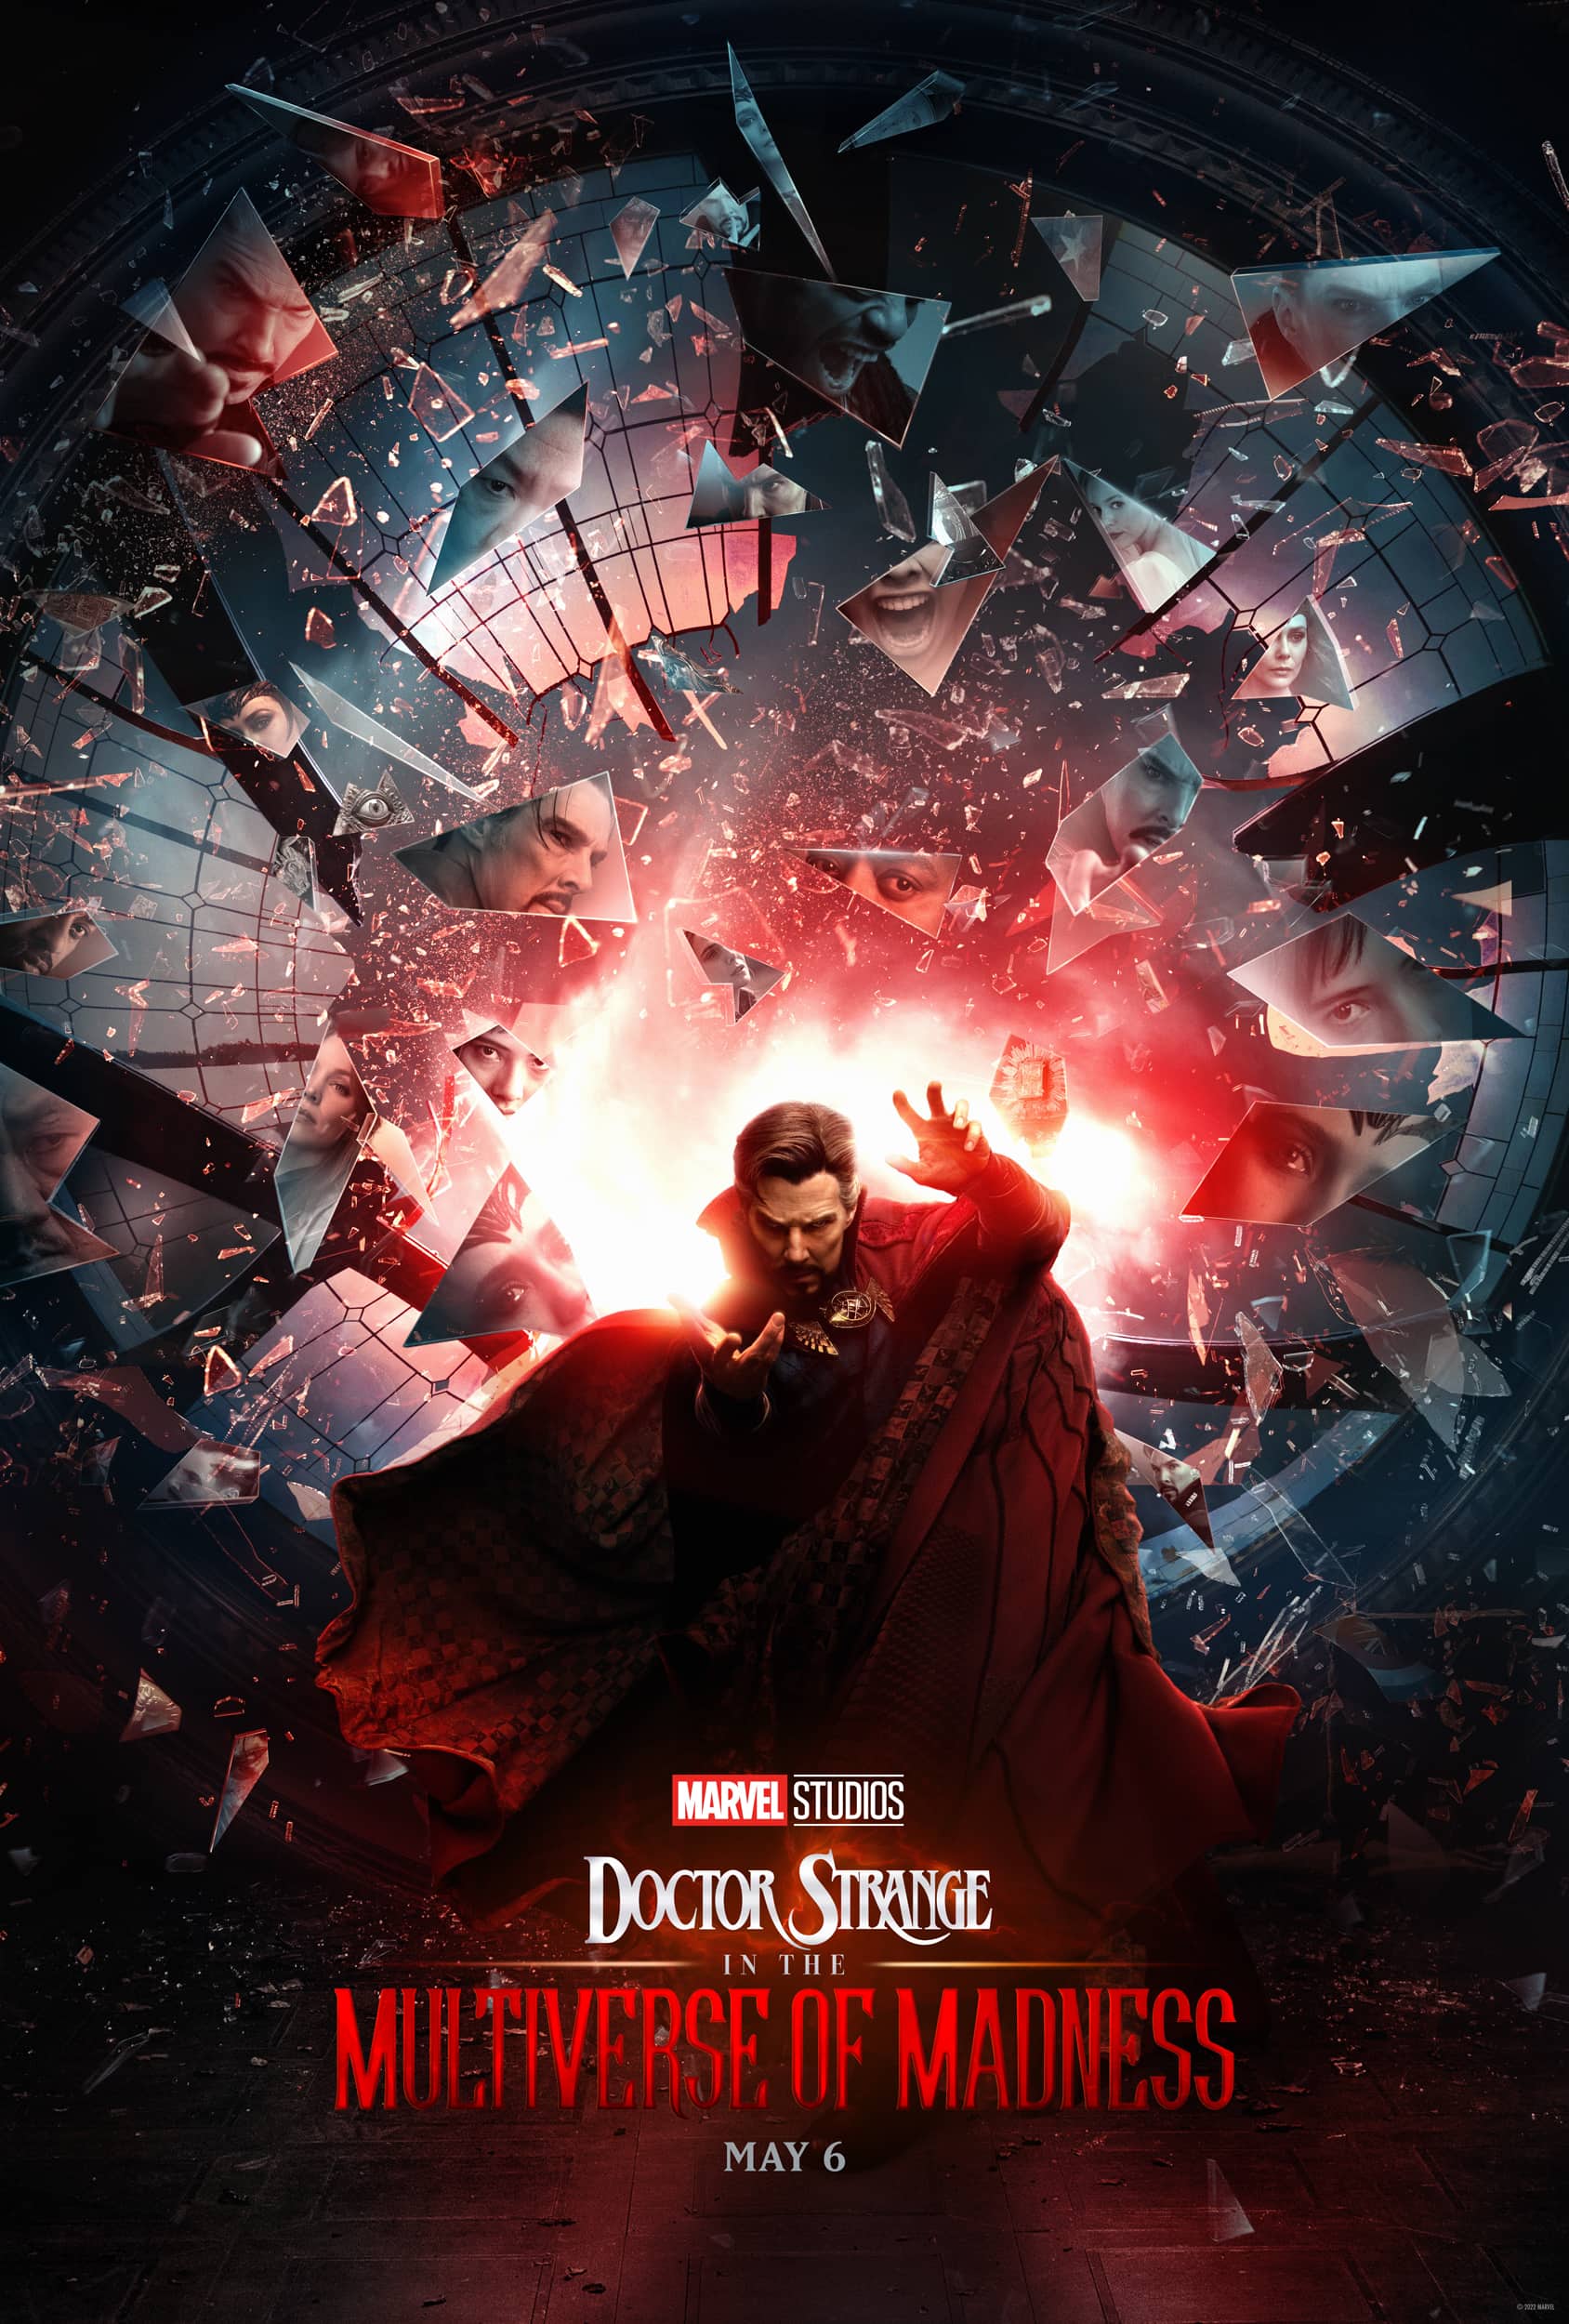 Doctor Strange In The Multiverse of Madness poster Easter eggs